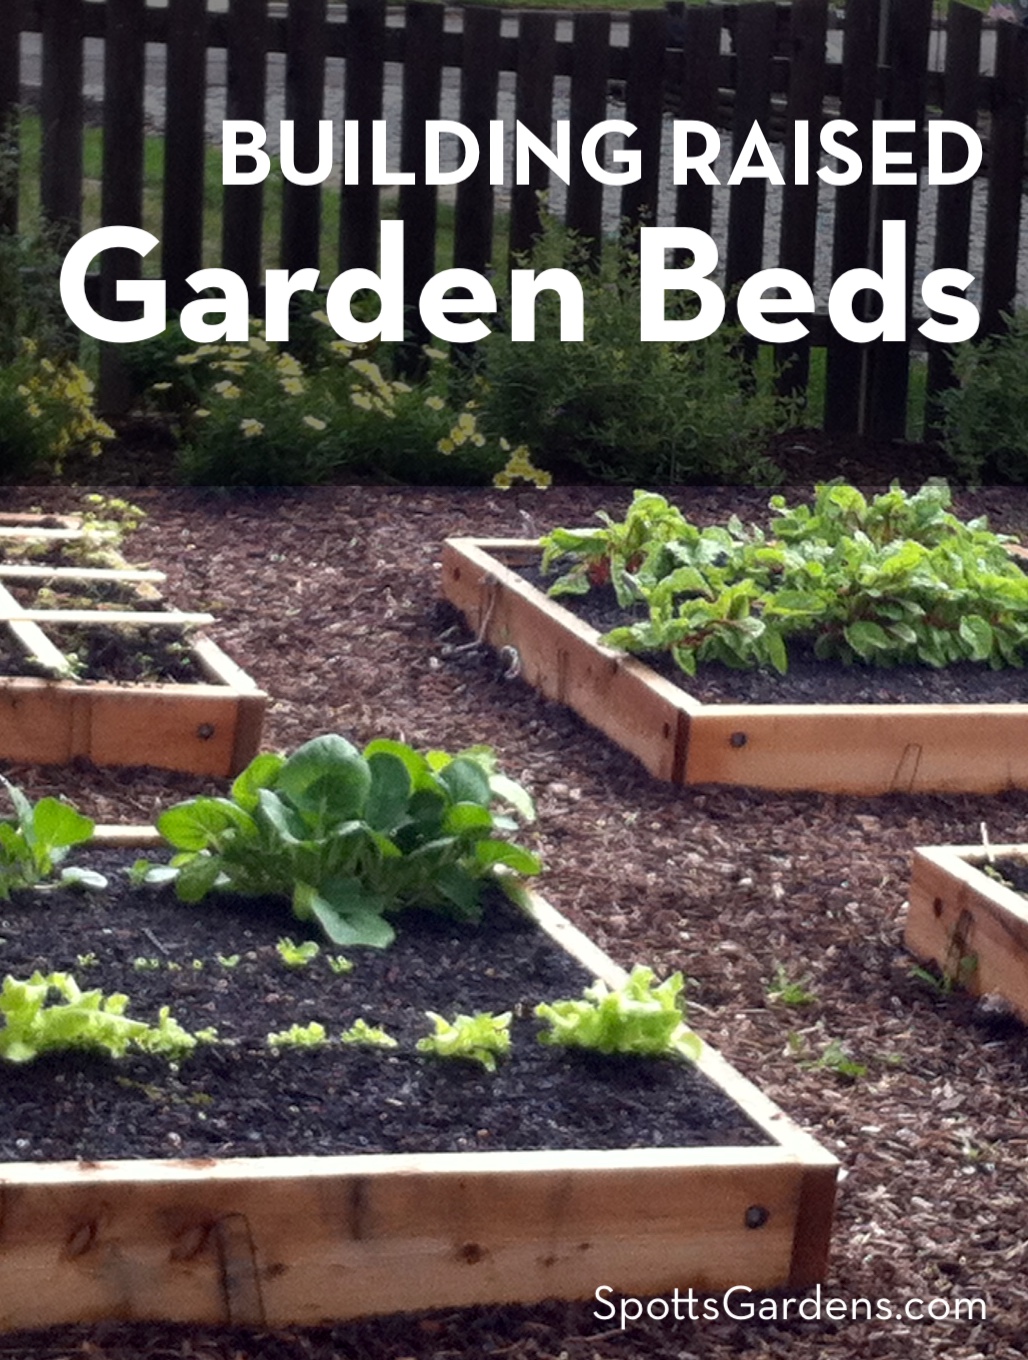 Building Raised Garden Beds Spotts, How To Build Raised Garden Beds With 4×4